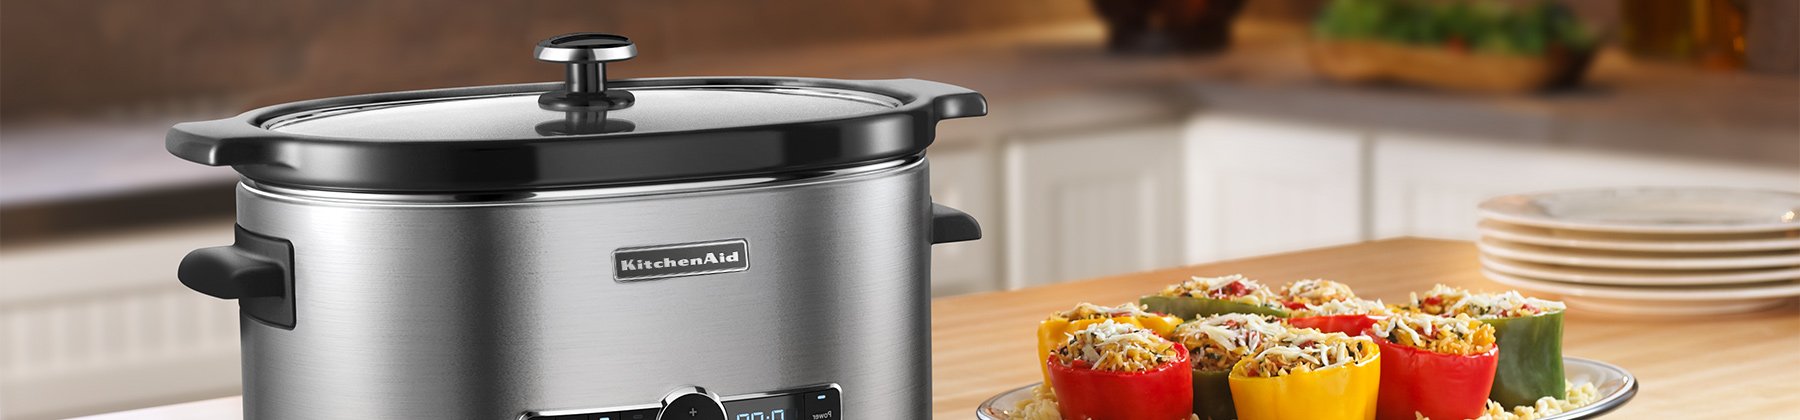 Slow Cookers, Pressure Cookers & Multi Cookers